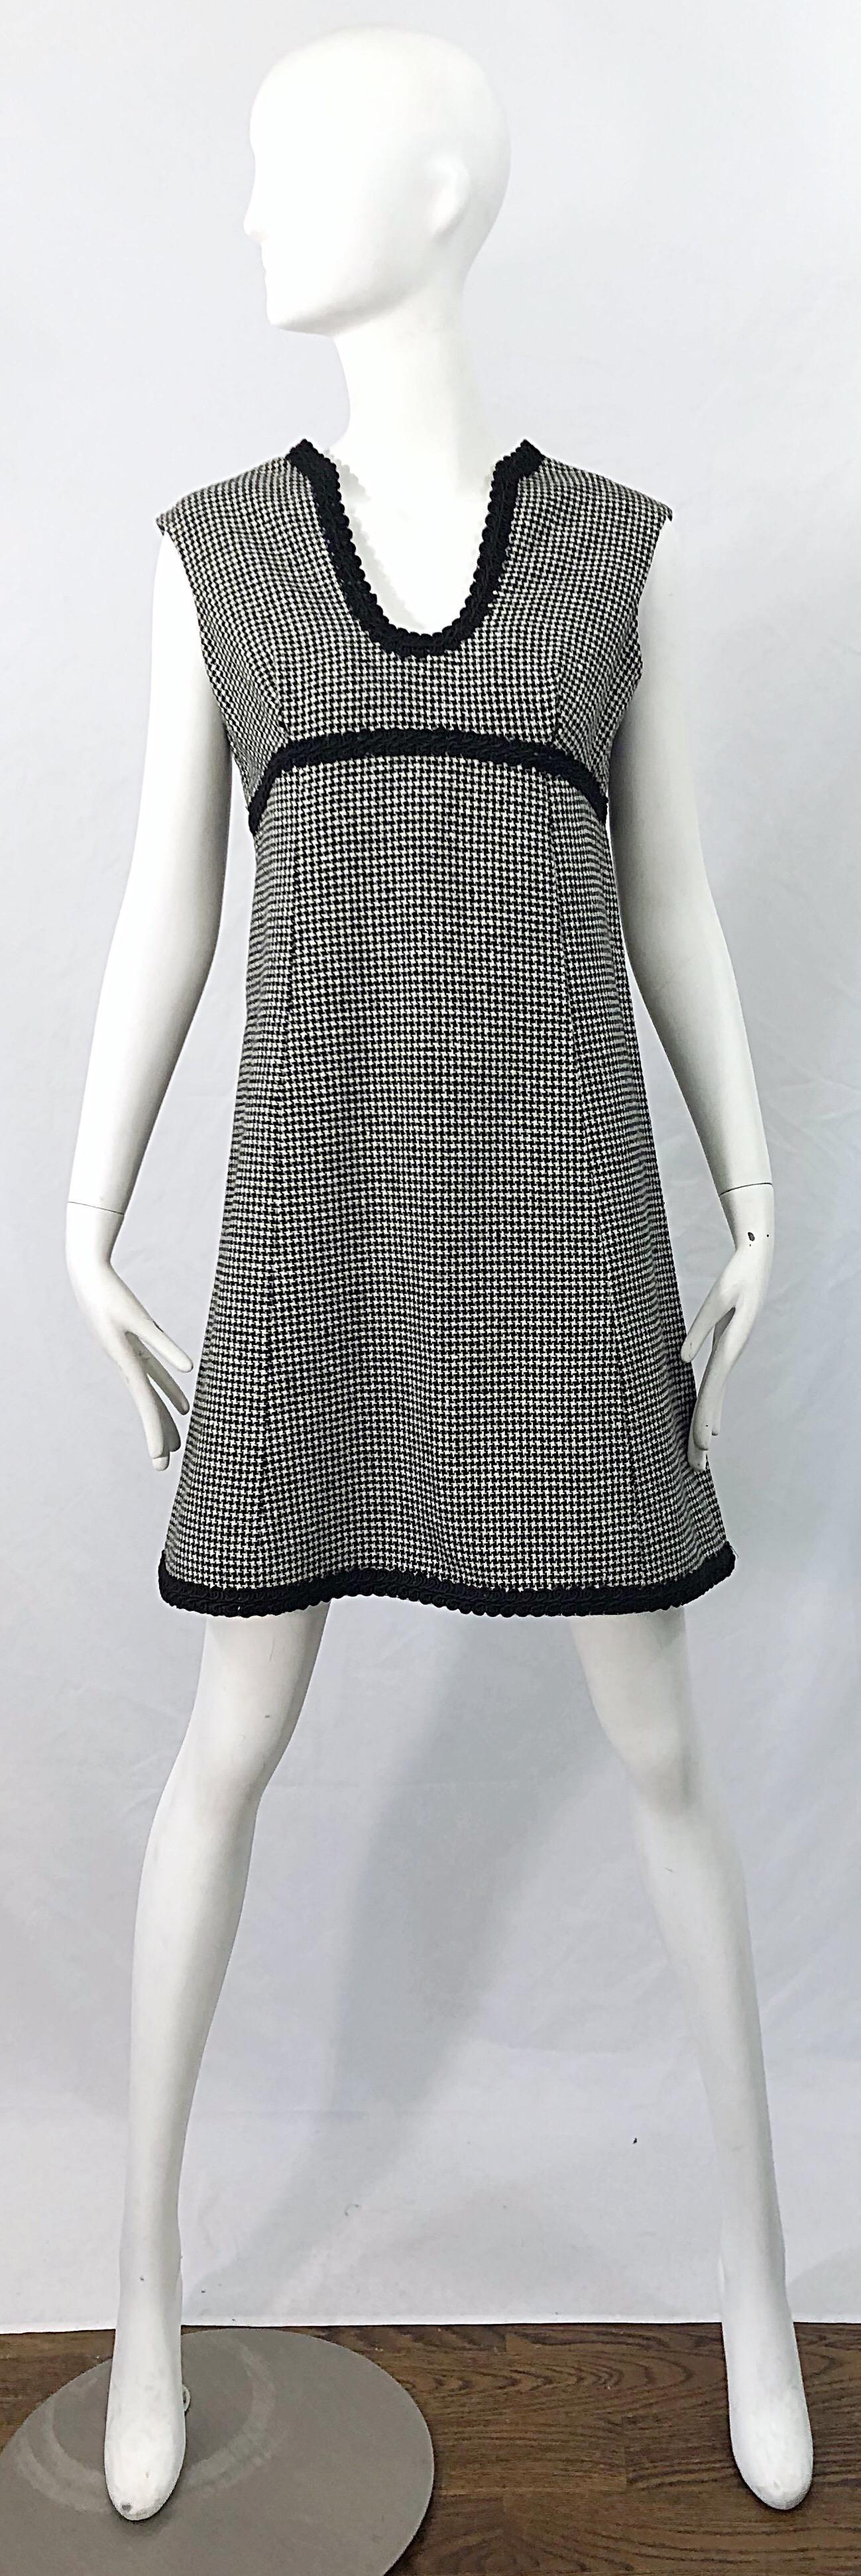 Chic MAMSELLE by BETTY CAROL black and white wool mini houndstooth print A-Line wool dress ! Features a pretty scooped v-neck with black embroidery. Empire style waist with embroidery under the bust and at the hem. Full metal zipper up the back with